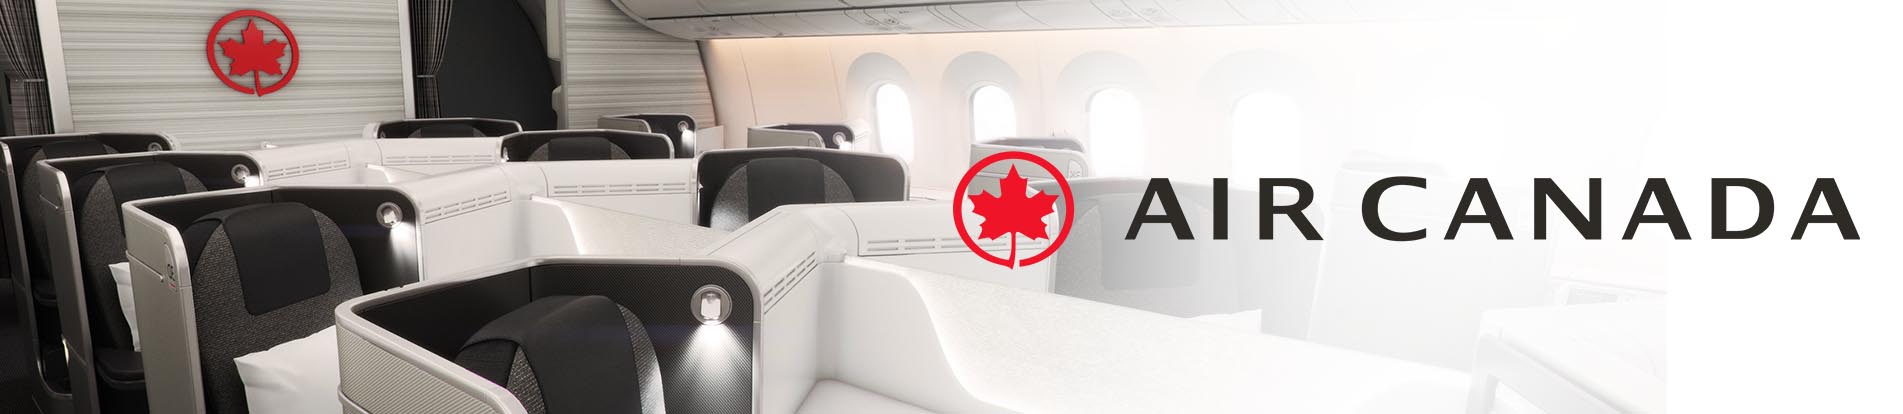 How to Get Air Canada Business Class Tickets?